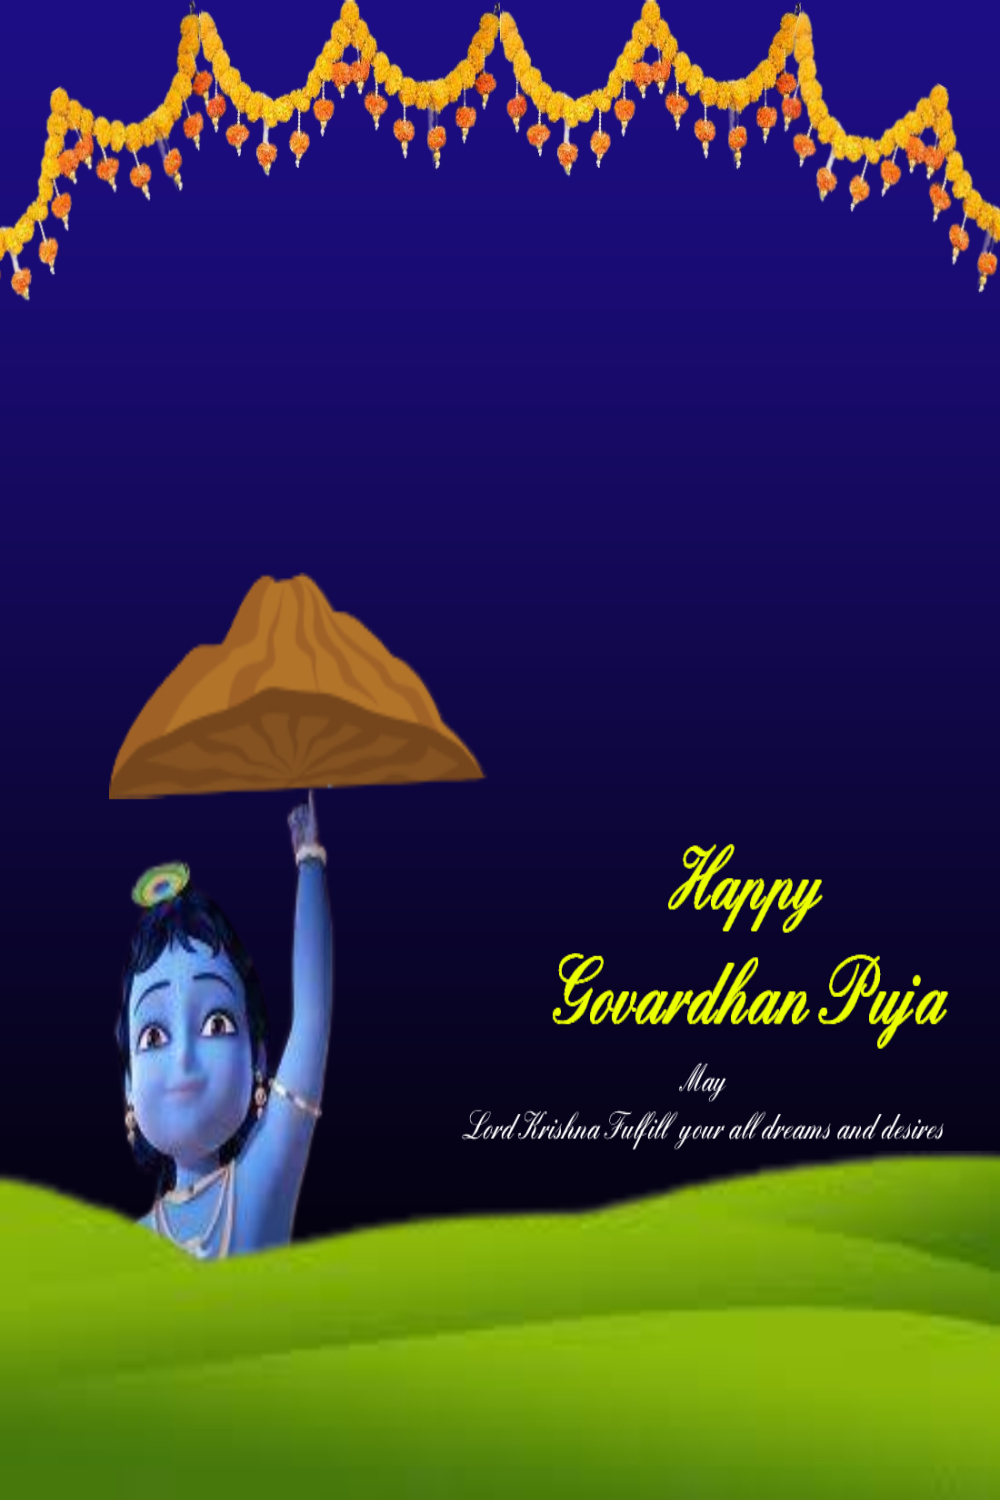 Govardhan puja template pinterest preview image.